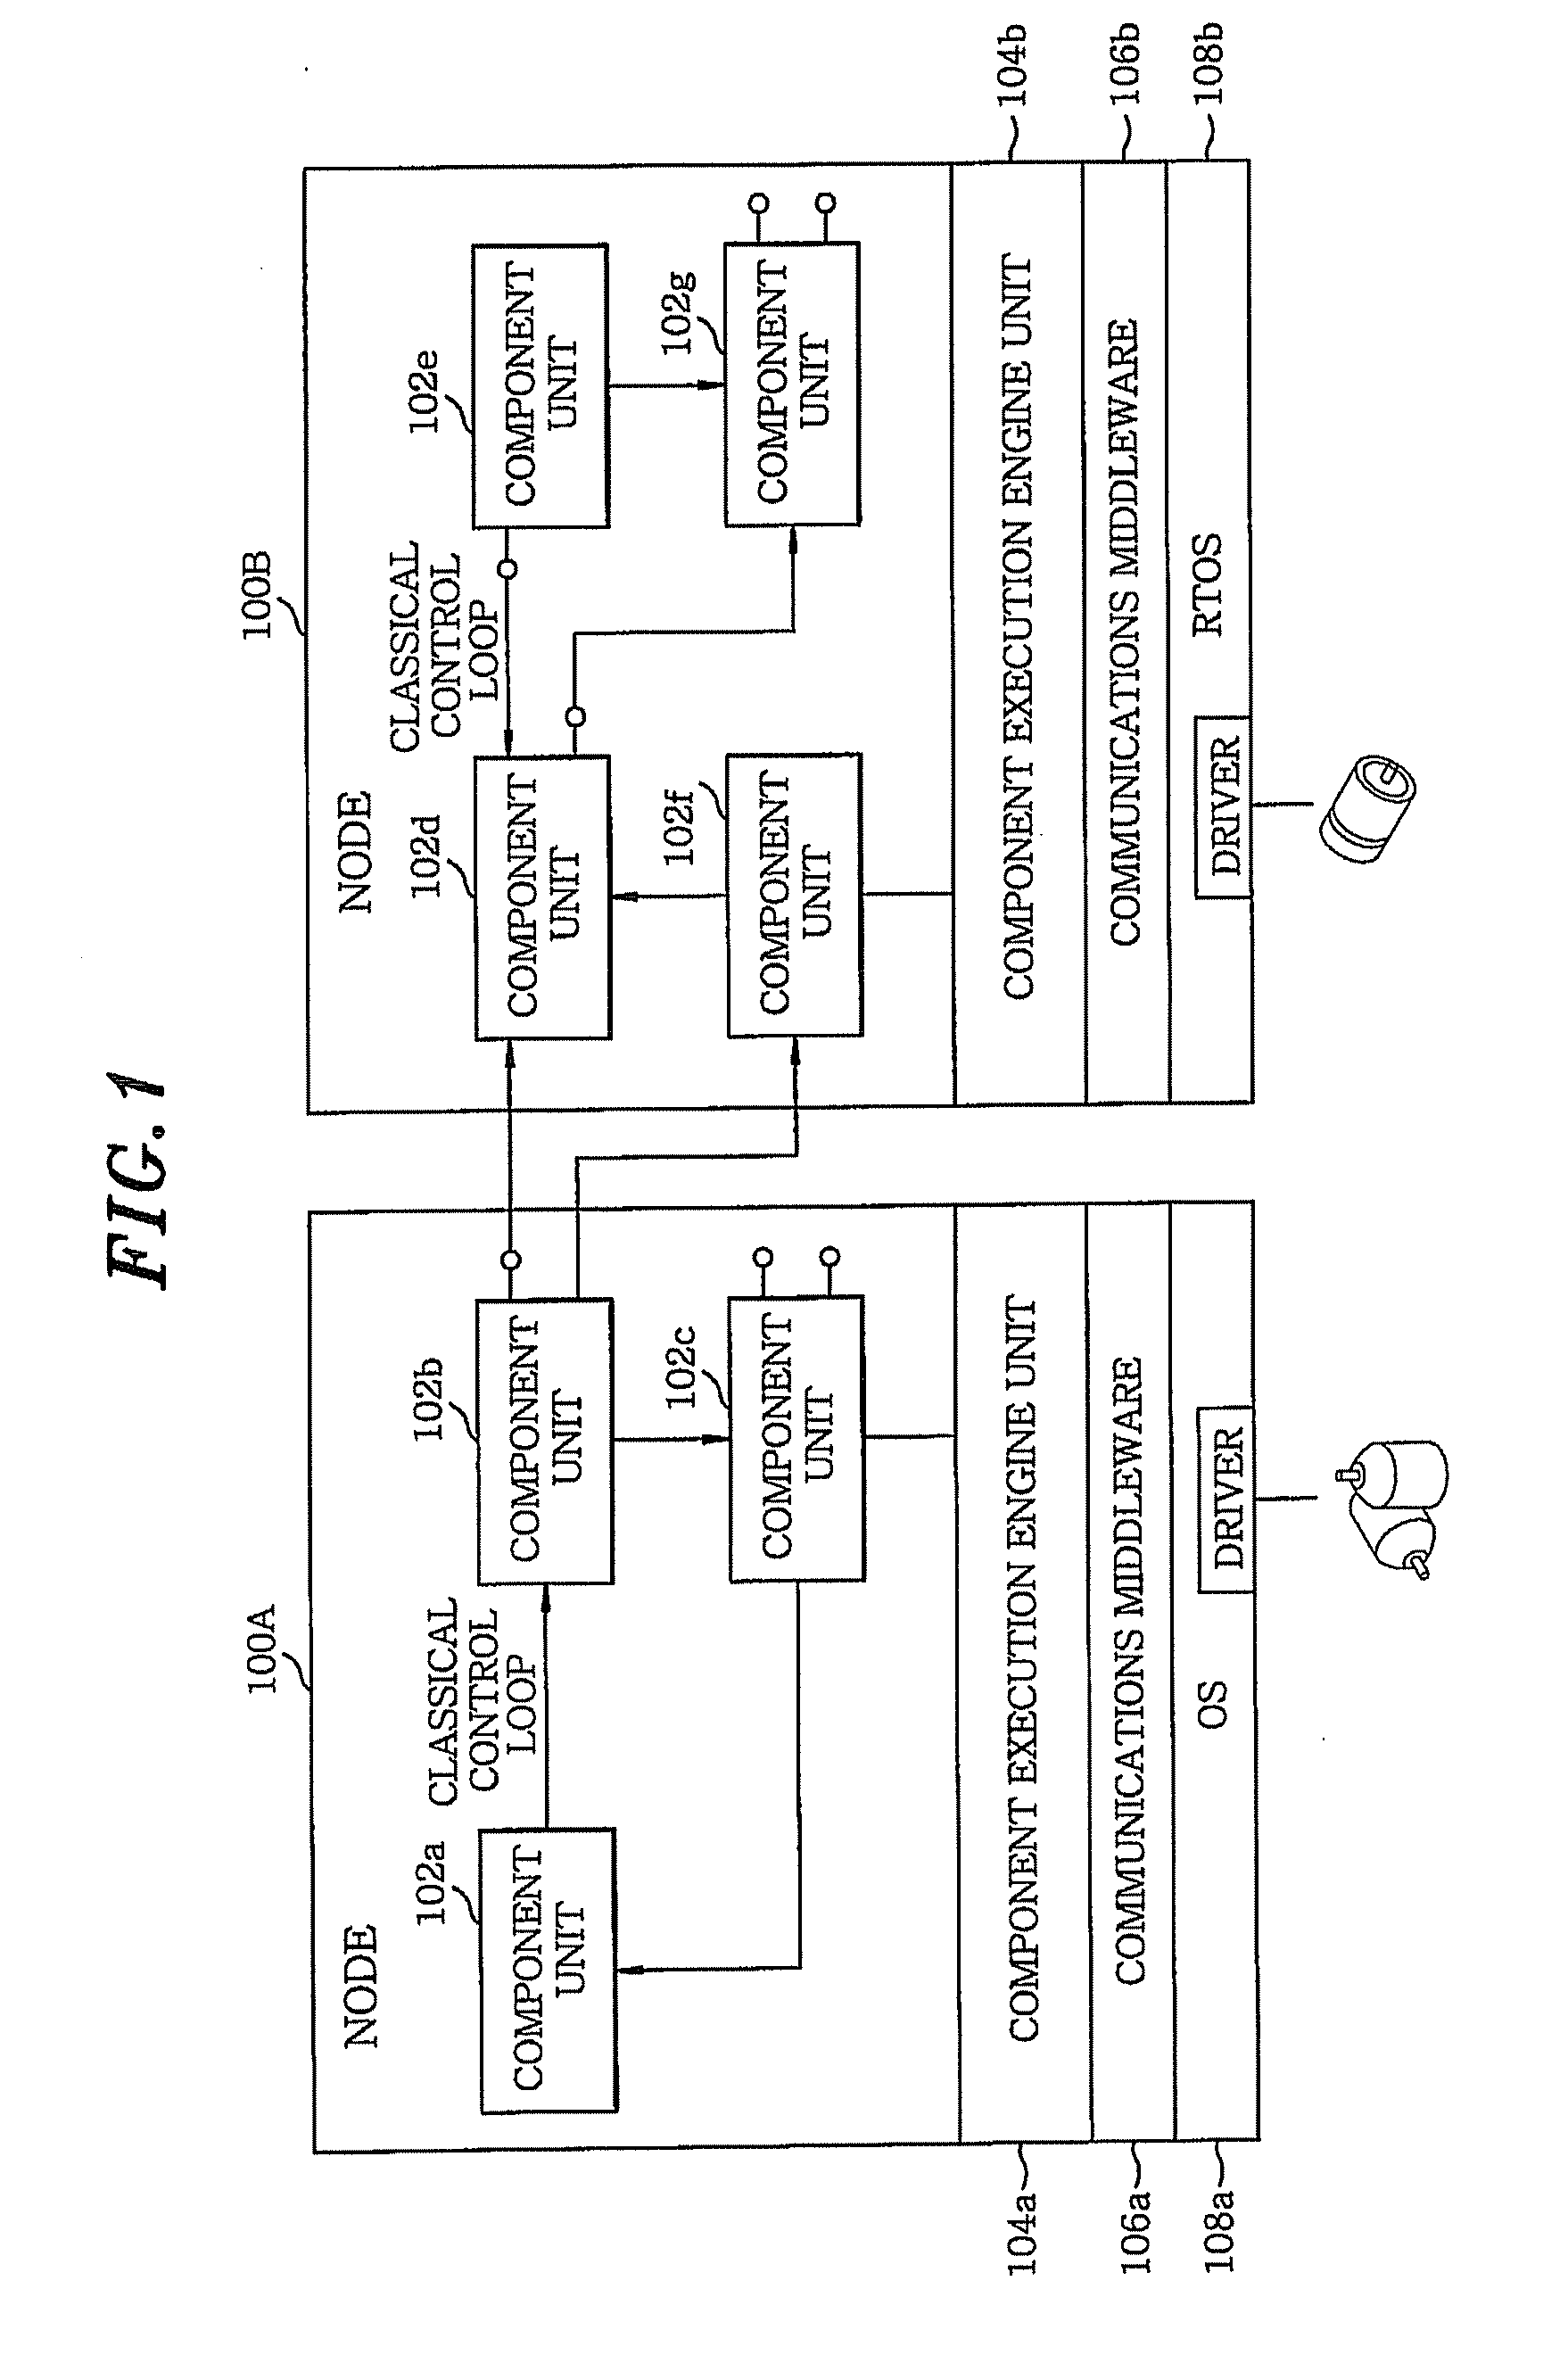 System and method for thread processing robot software components